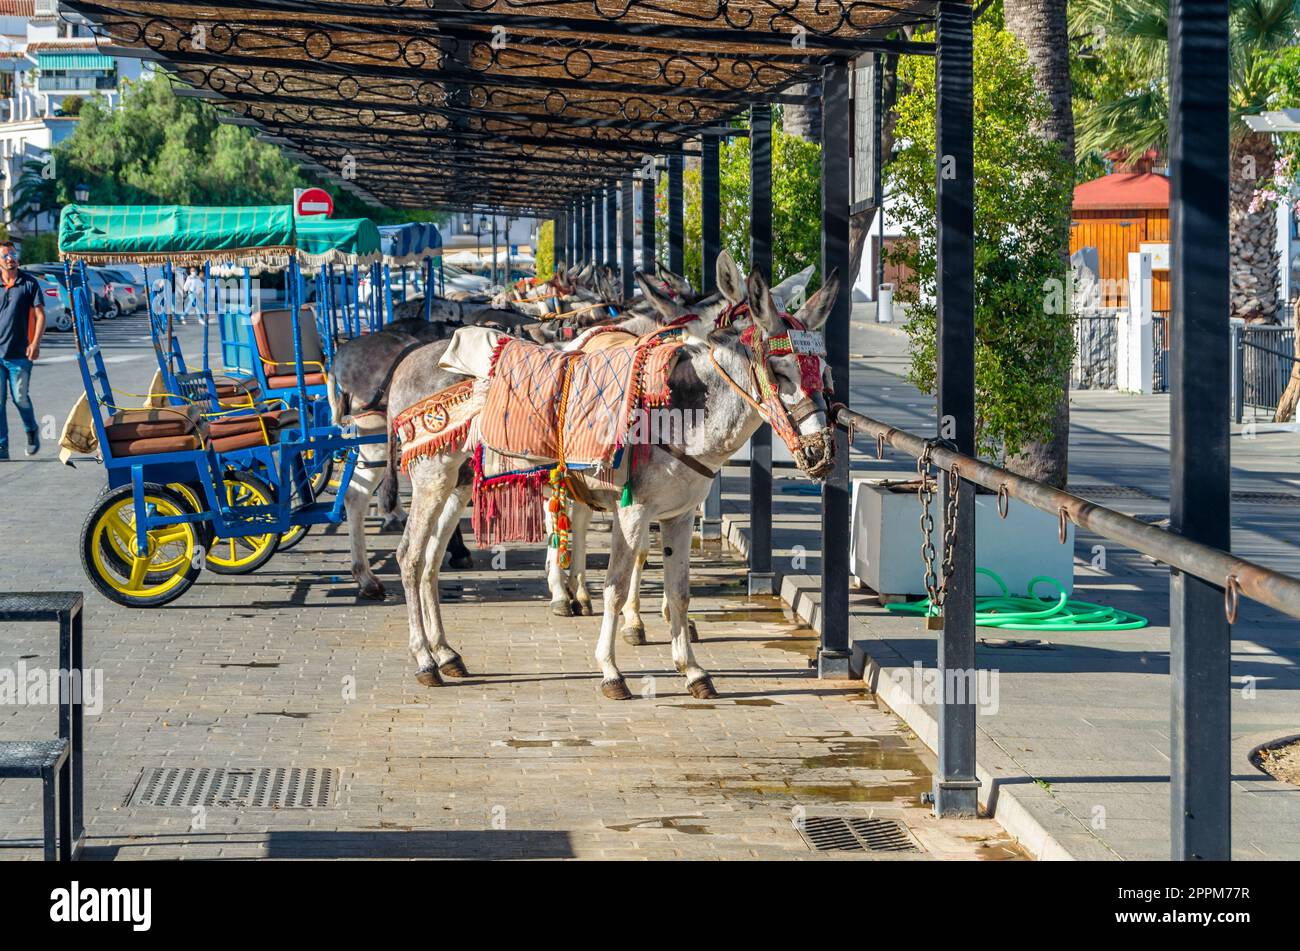 MIJAS, SPAIN - OCTOBER 9, 2021: Donkeys in the town of Mijas, Andalusia, southern Spain. One of the tourist attractions in Mijas is sightseeing in Burro-taxis or donkey-drawn carts and donkey-back rides Stock Photo